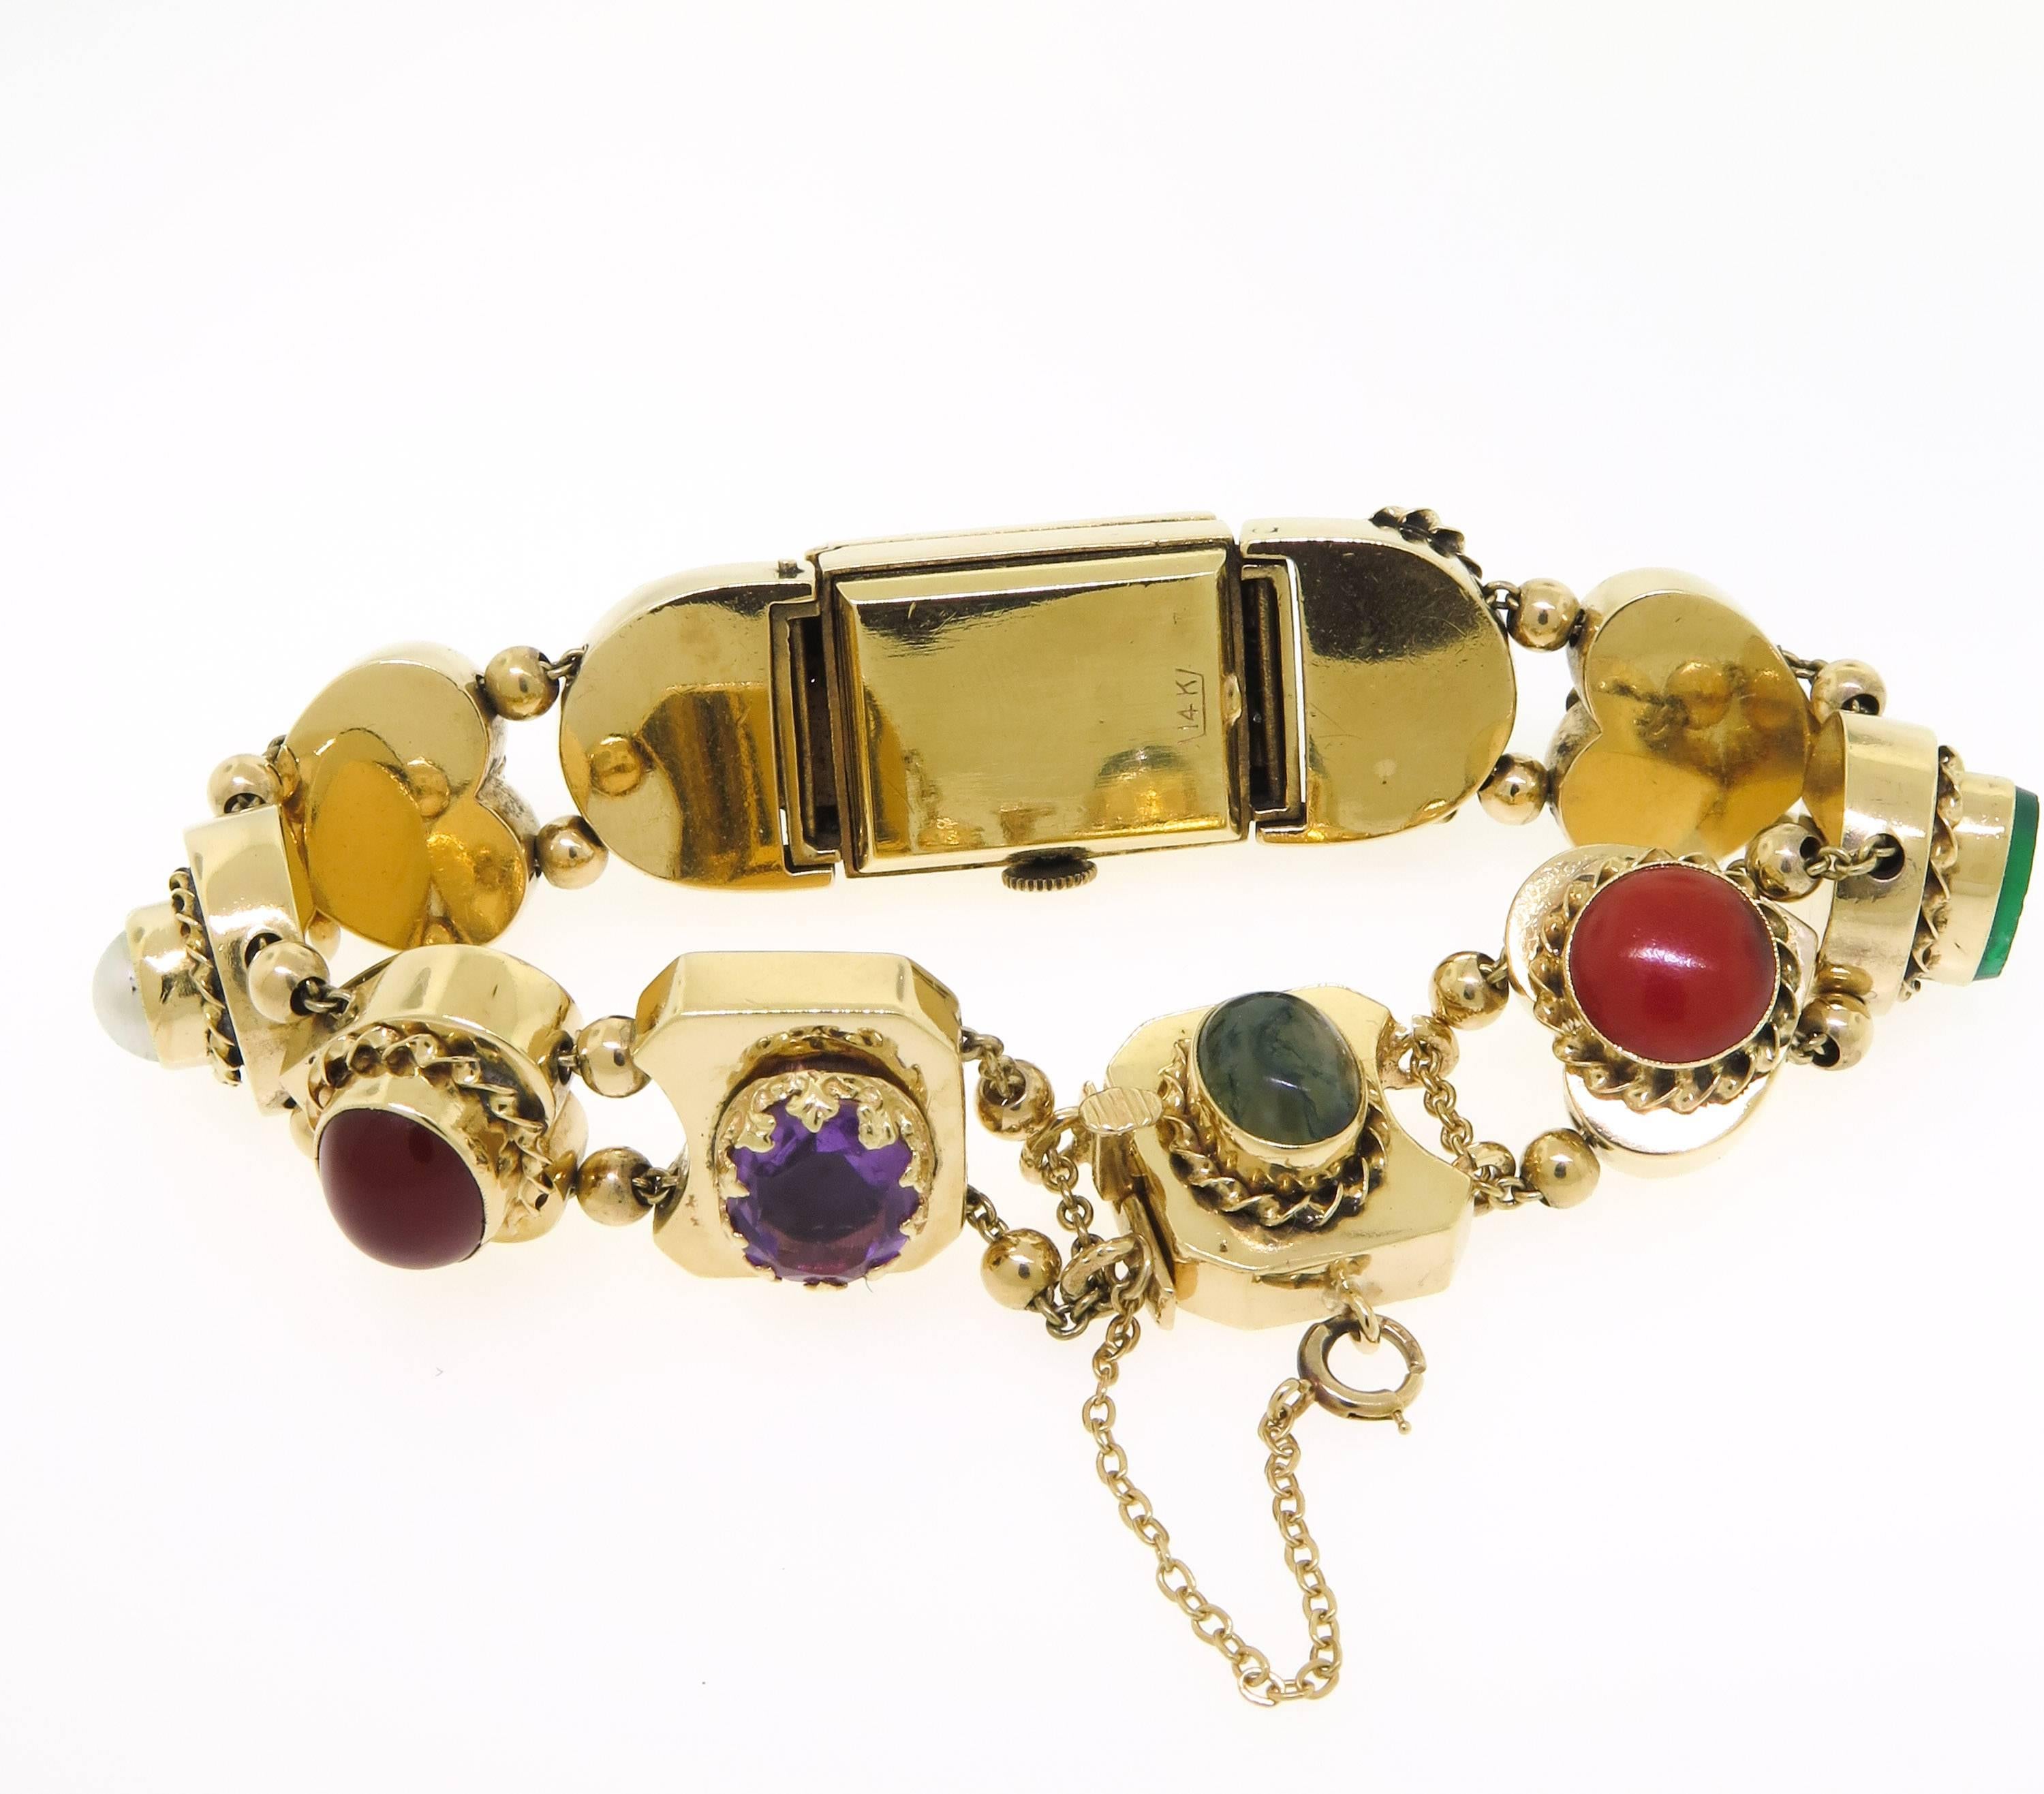 This vintage bracelet features 10 charms in different shapes and colored stones set in 14K yellow gold. This piece measures 7 inches with a box clasp closure and safety chain; the largest charm at the center features a hidden rectangular shaped